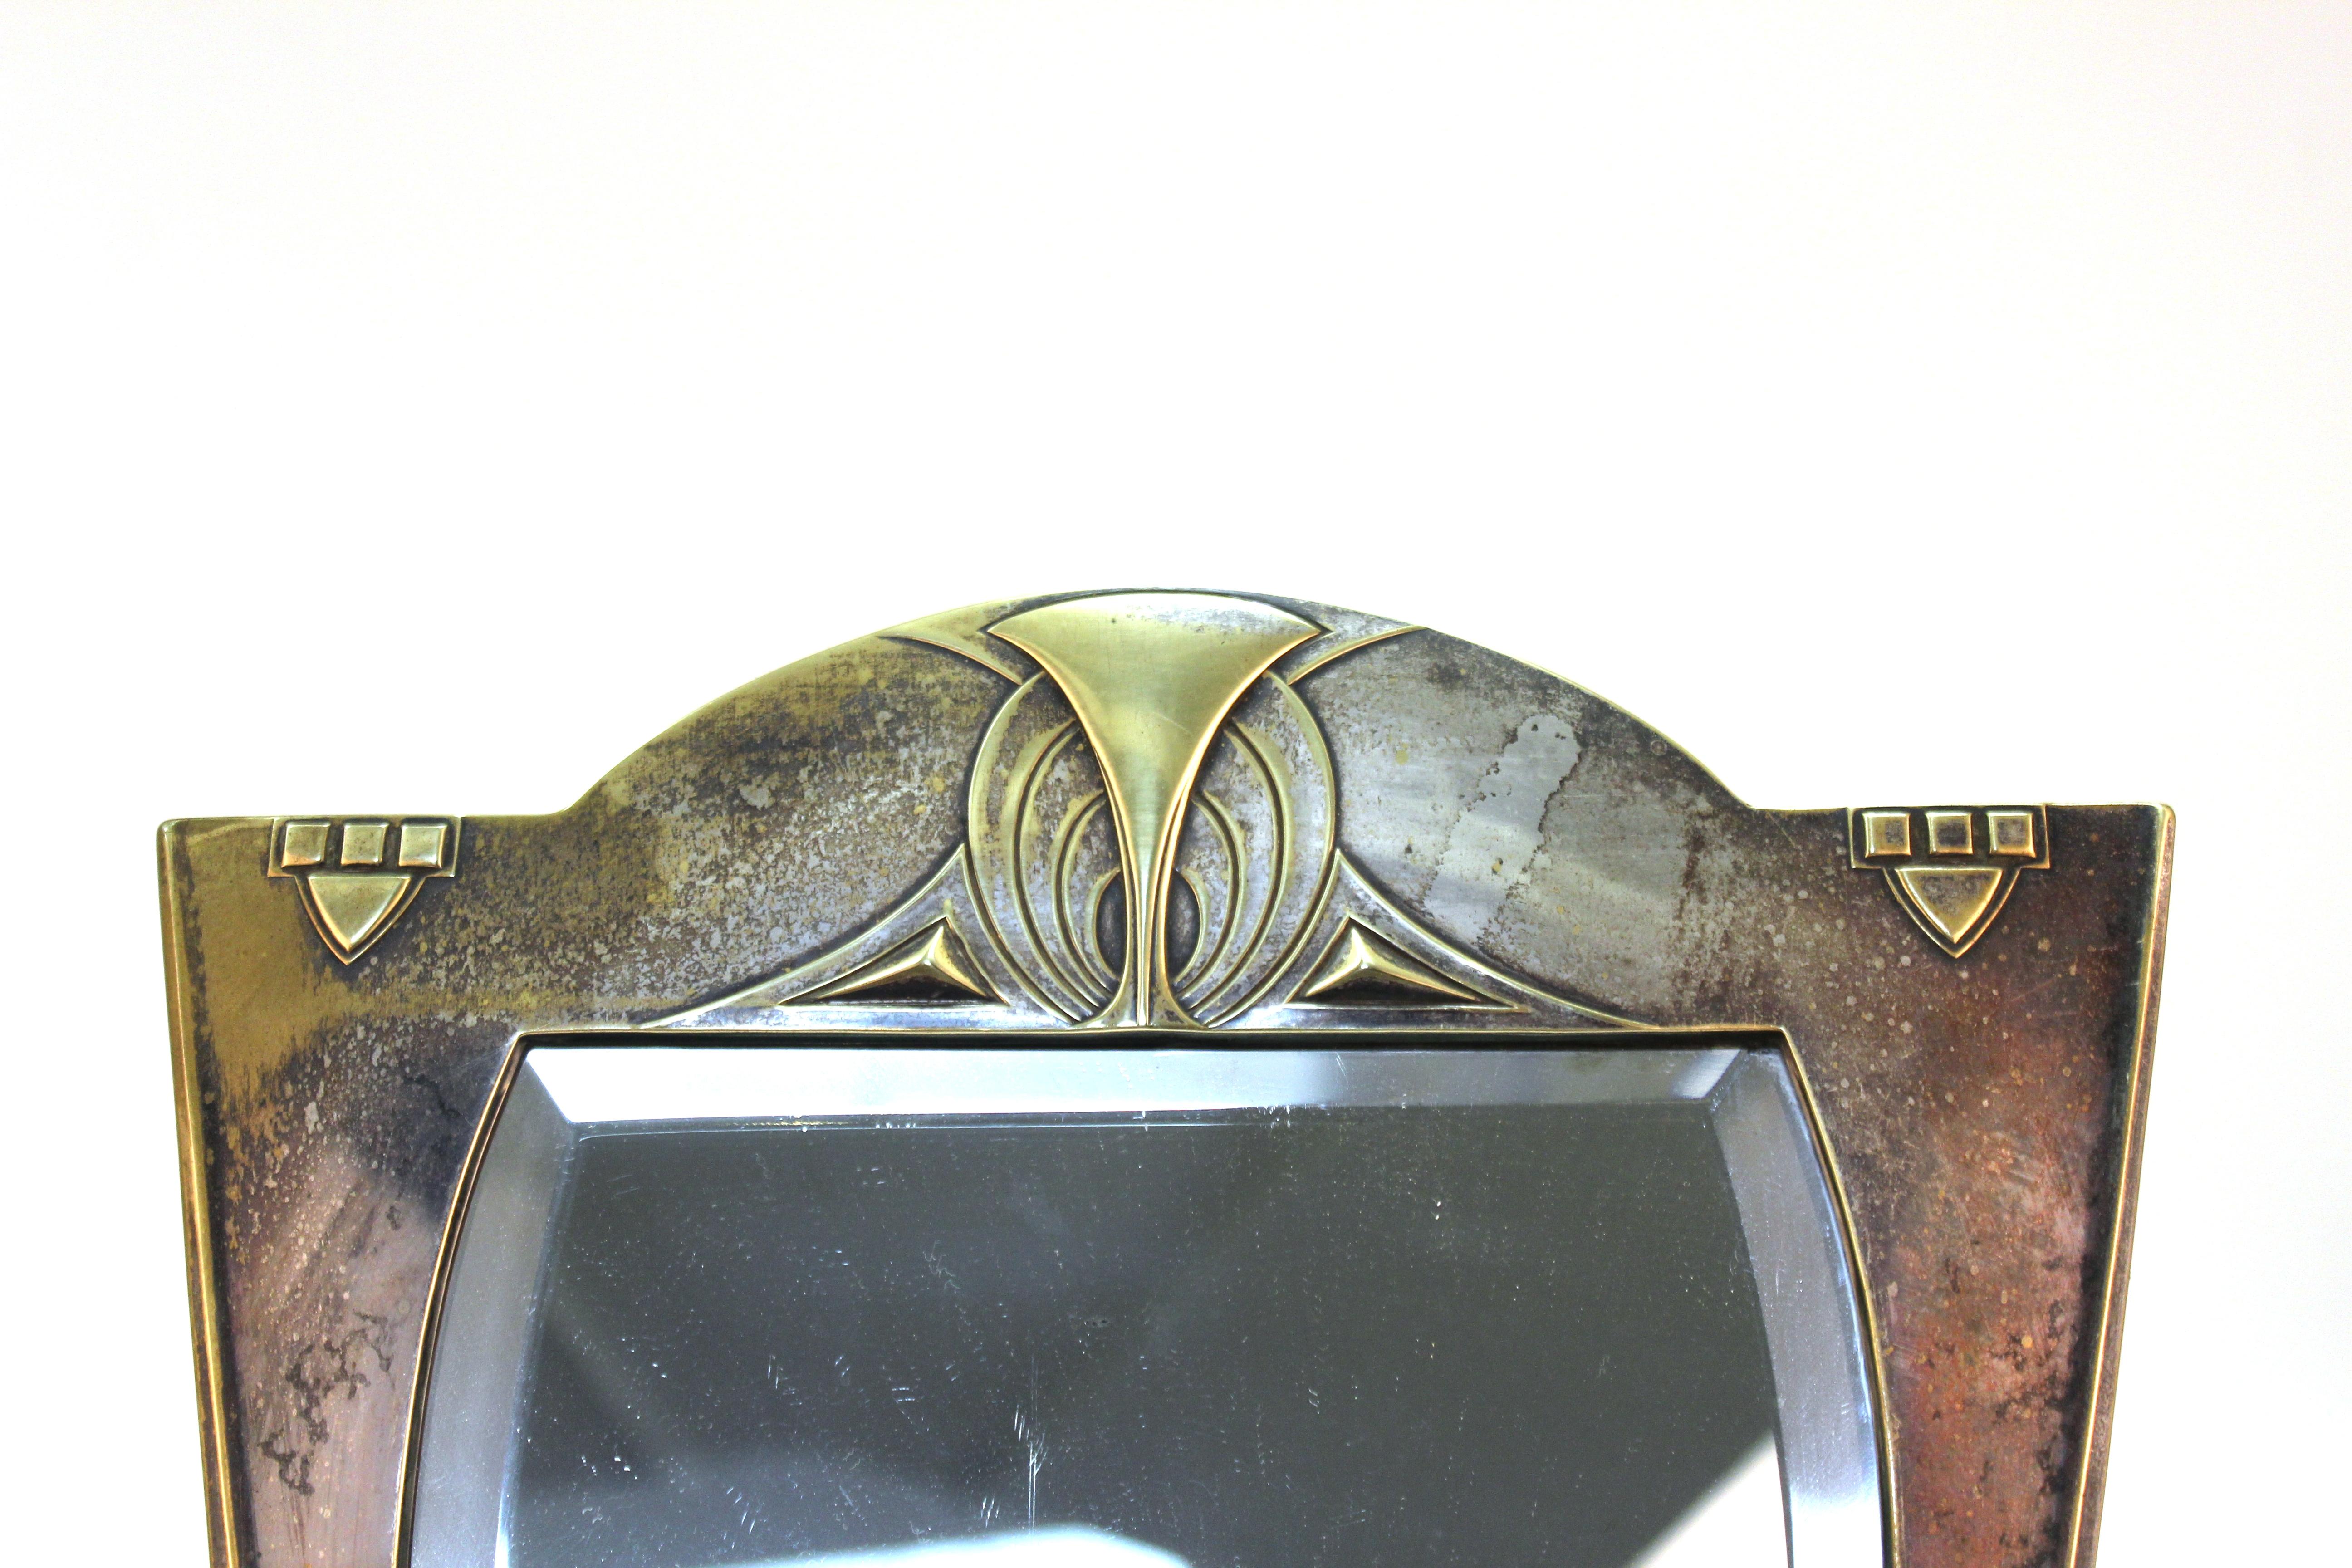 Early 20th Century German Jugendstil Silvered Brass Mirror Attributed to Peter Behrens